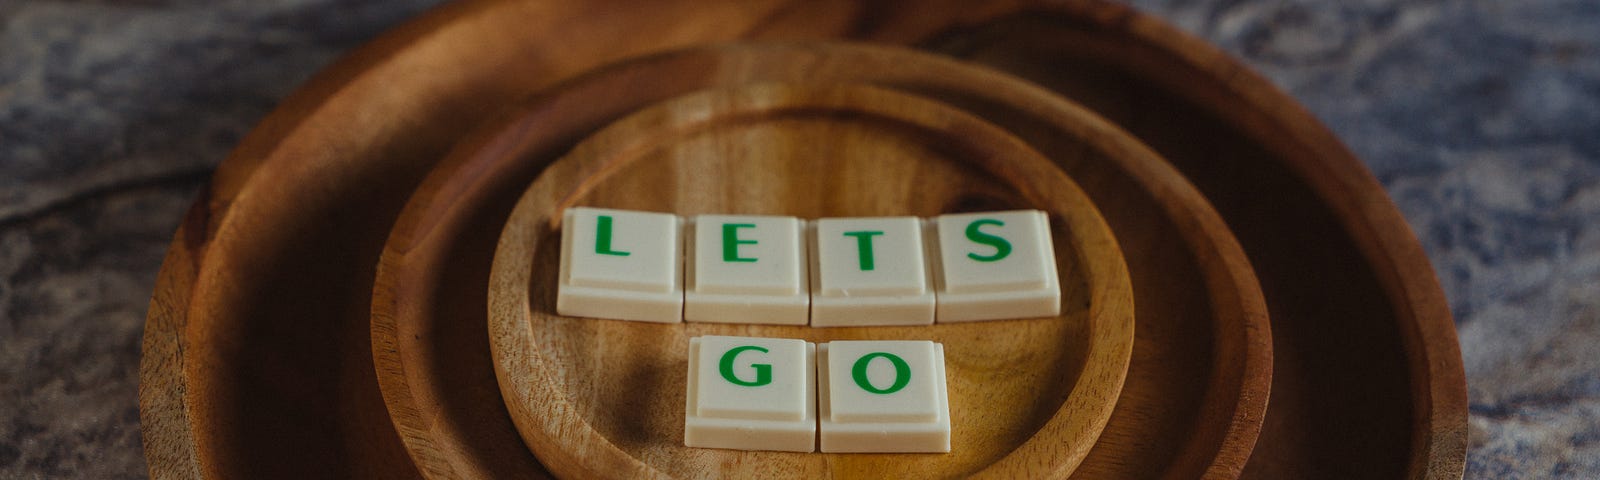 Blocks of letters that spell out “LETS GO” on three wooden plates.